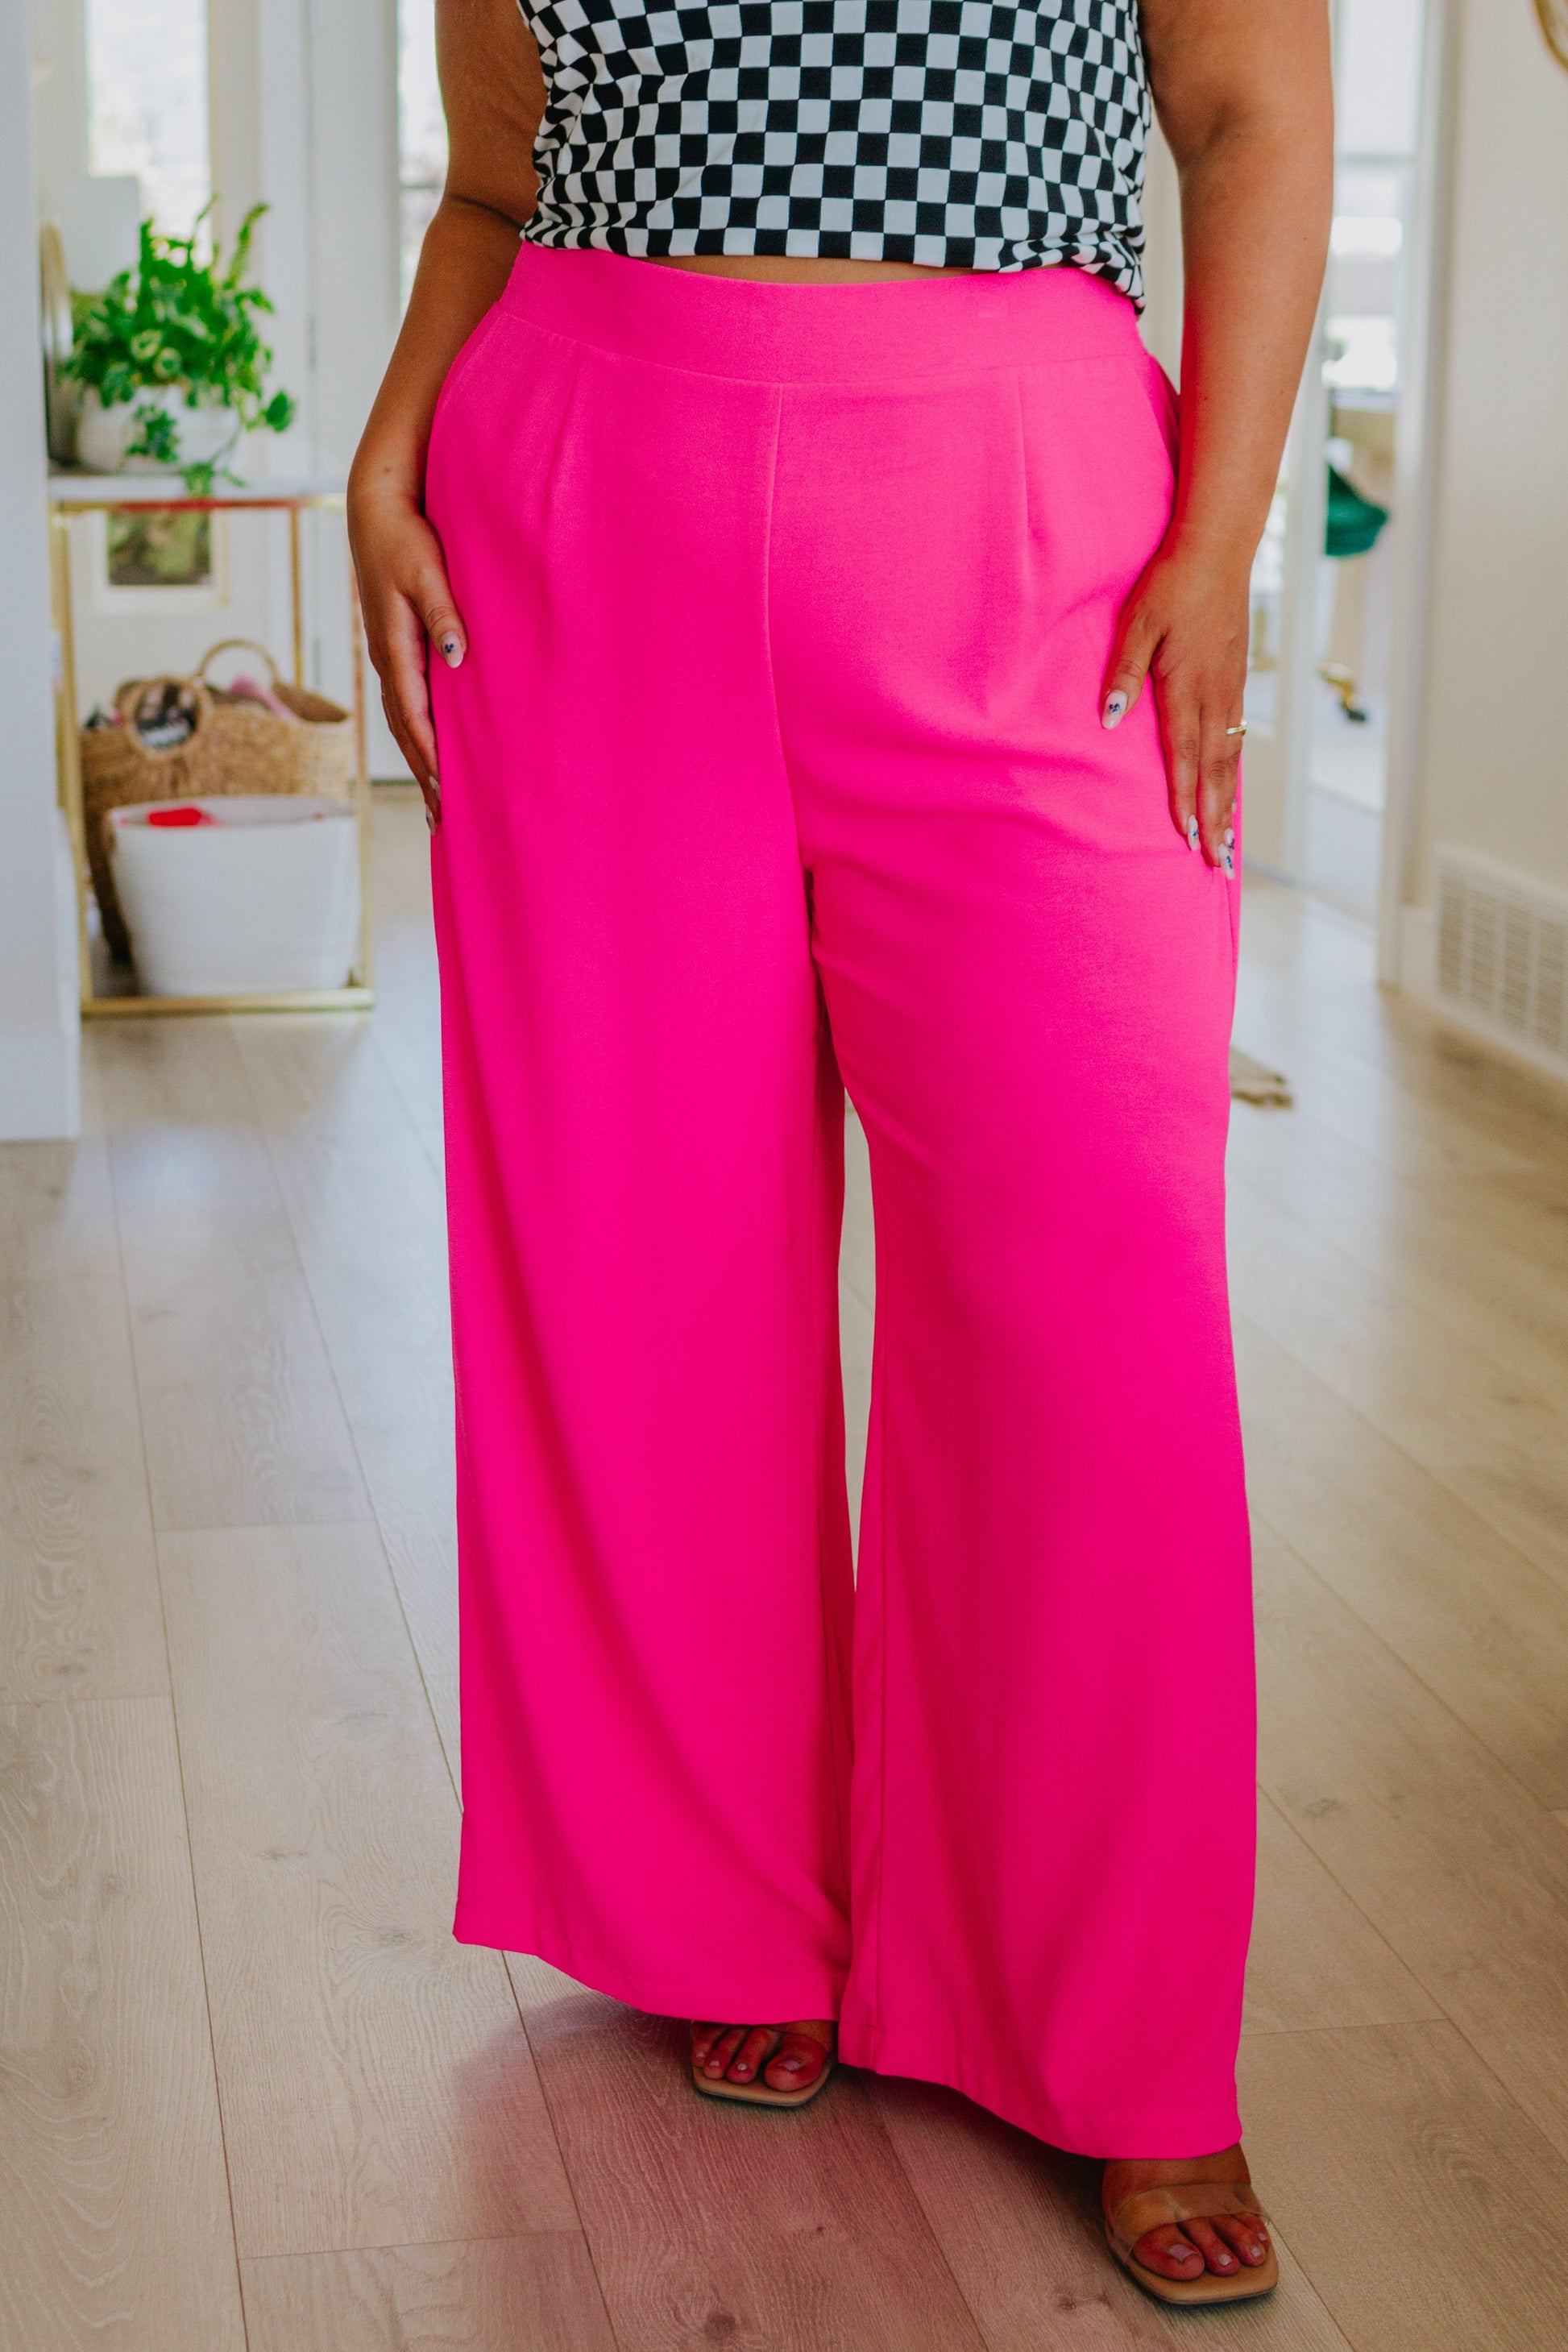 Ive been super into pink looks lately, love these pants!! I wanna